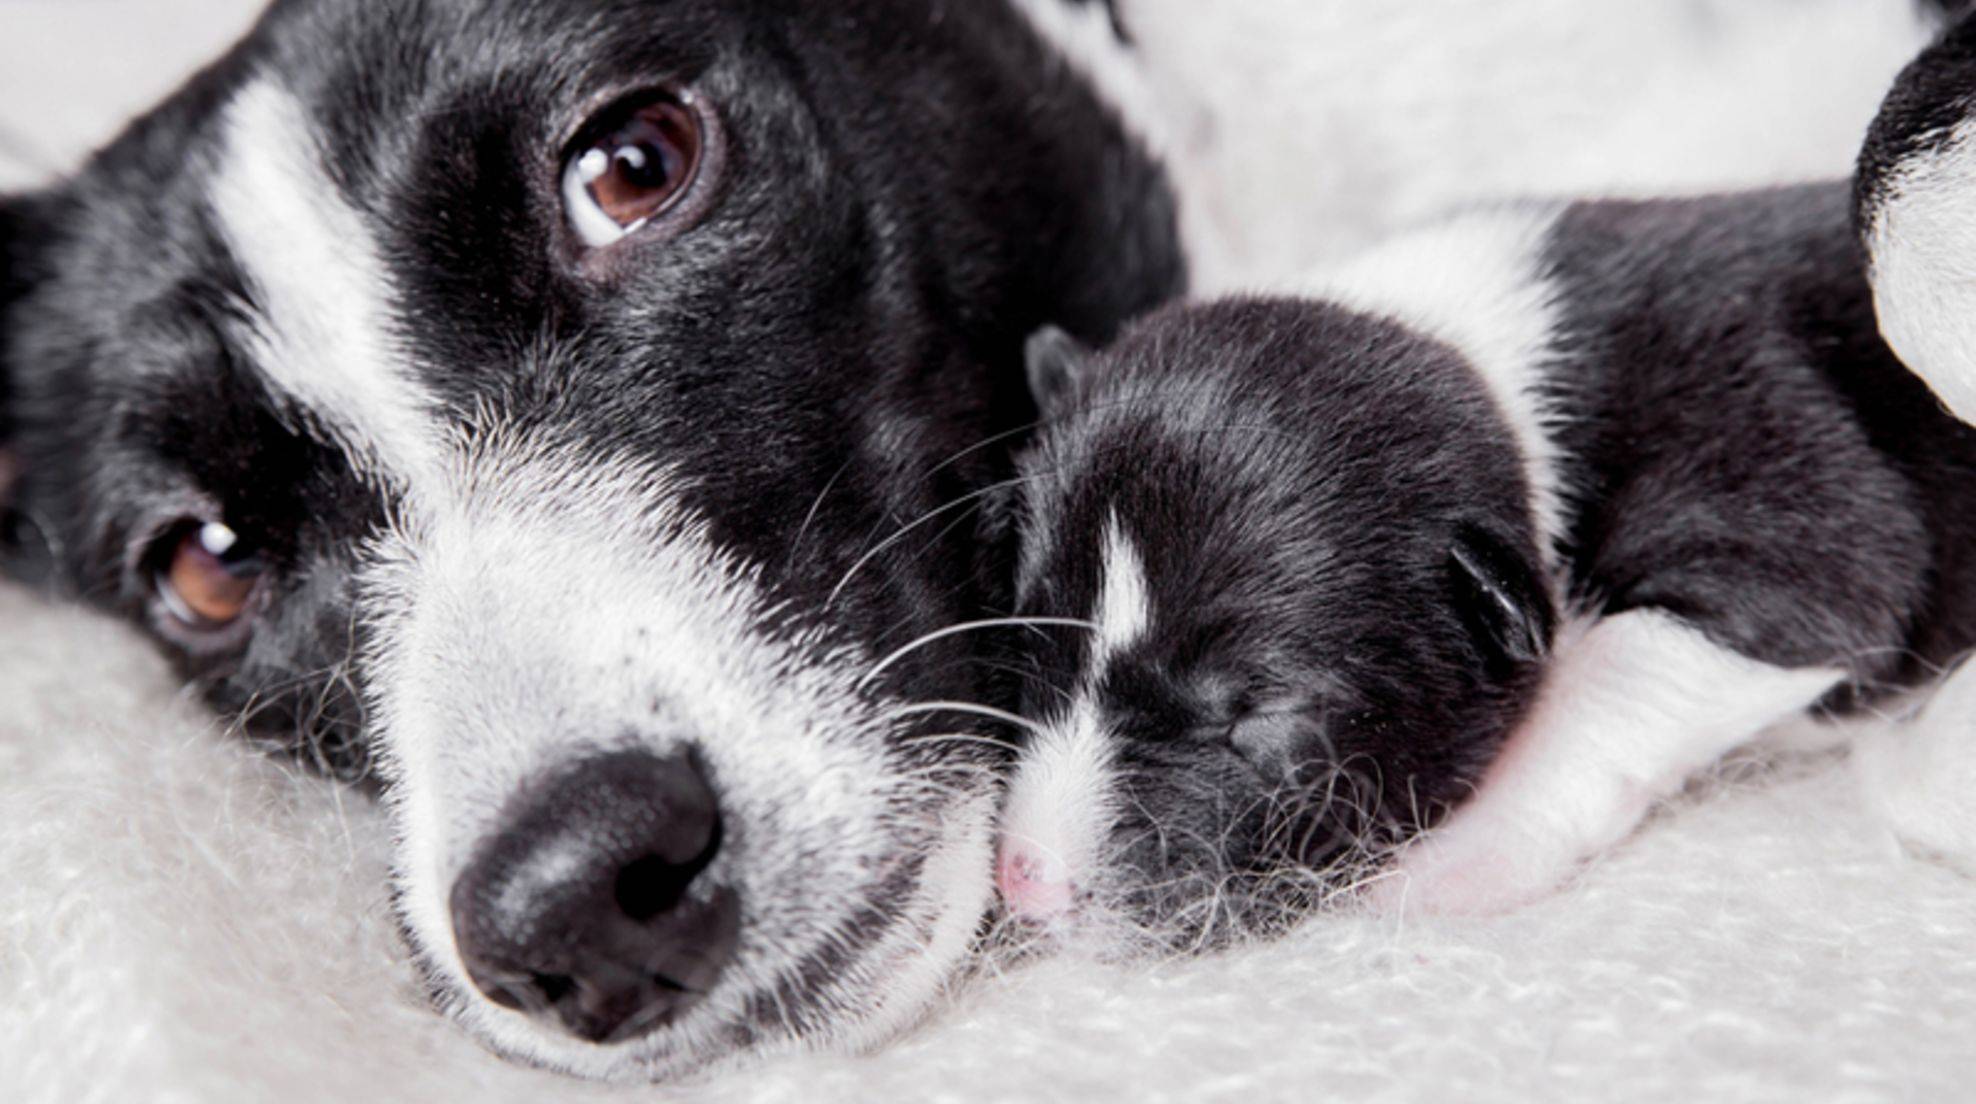 Birth in dogs: Signs, duration & process of giving birth to puppies